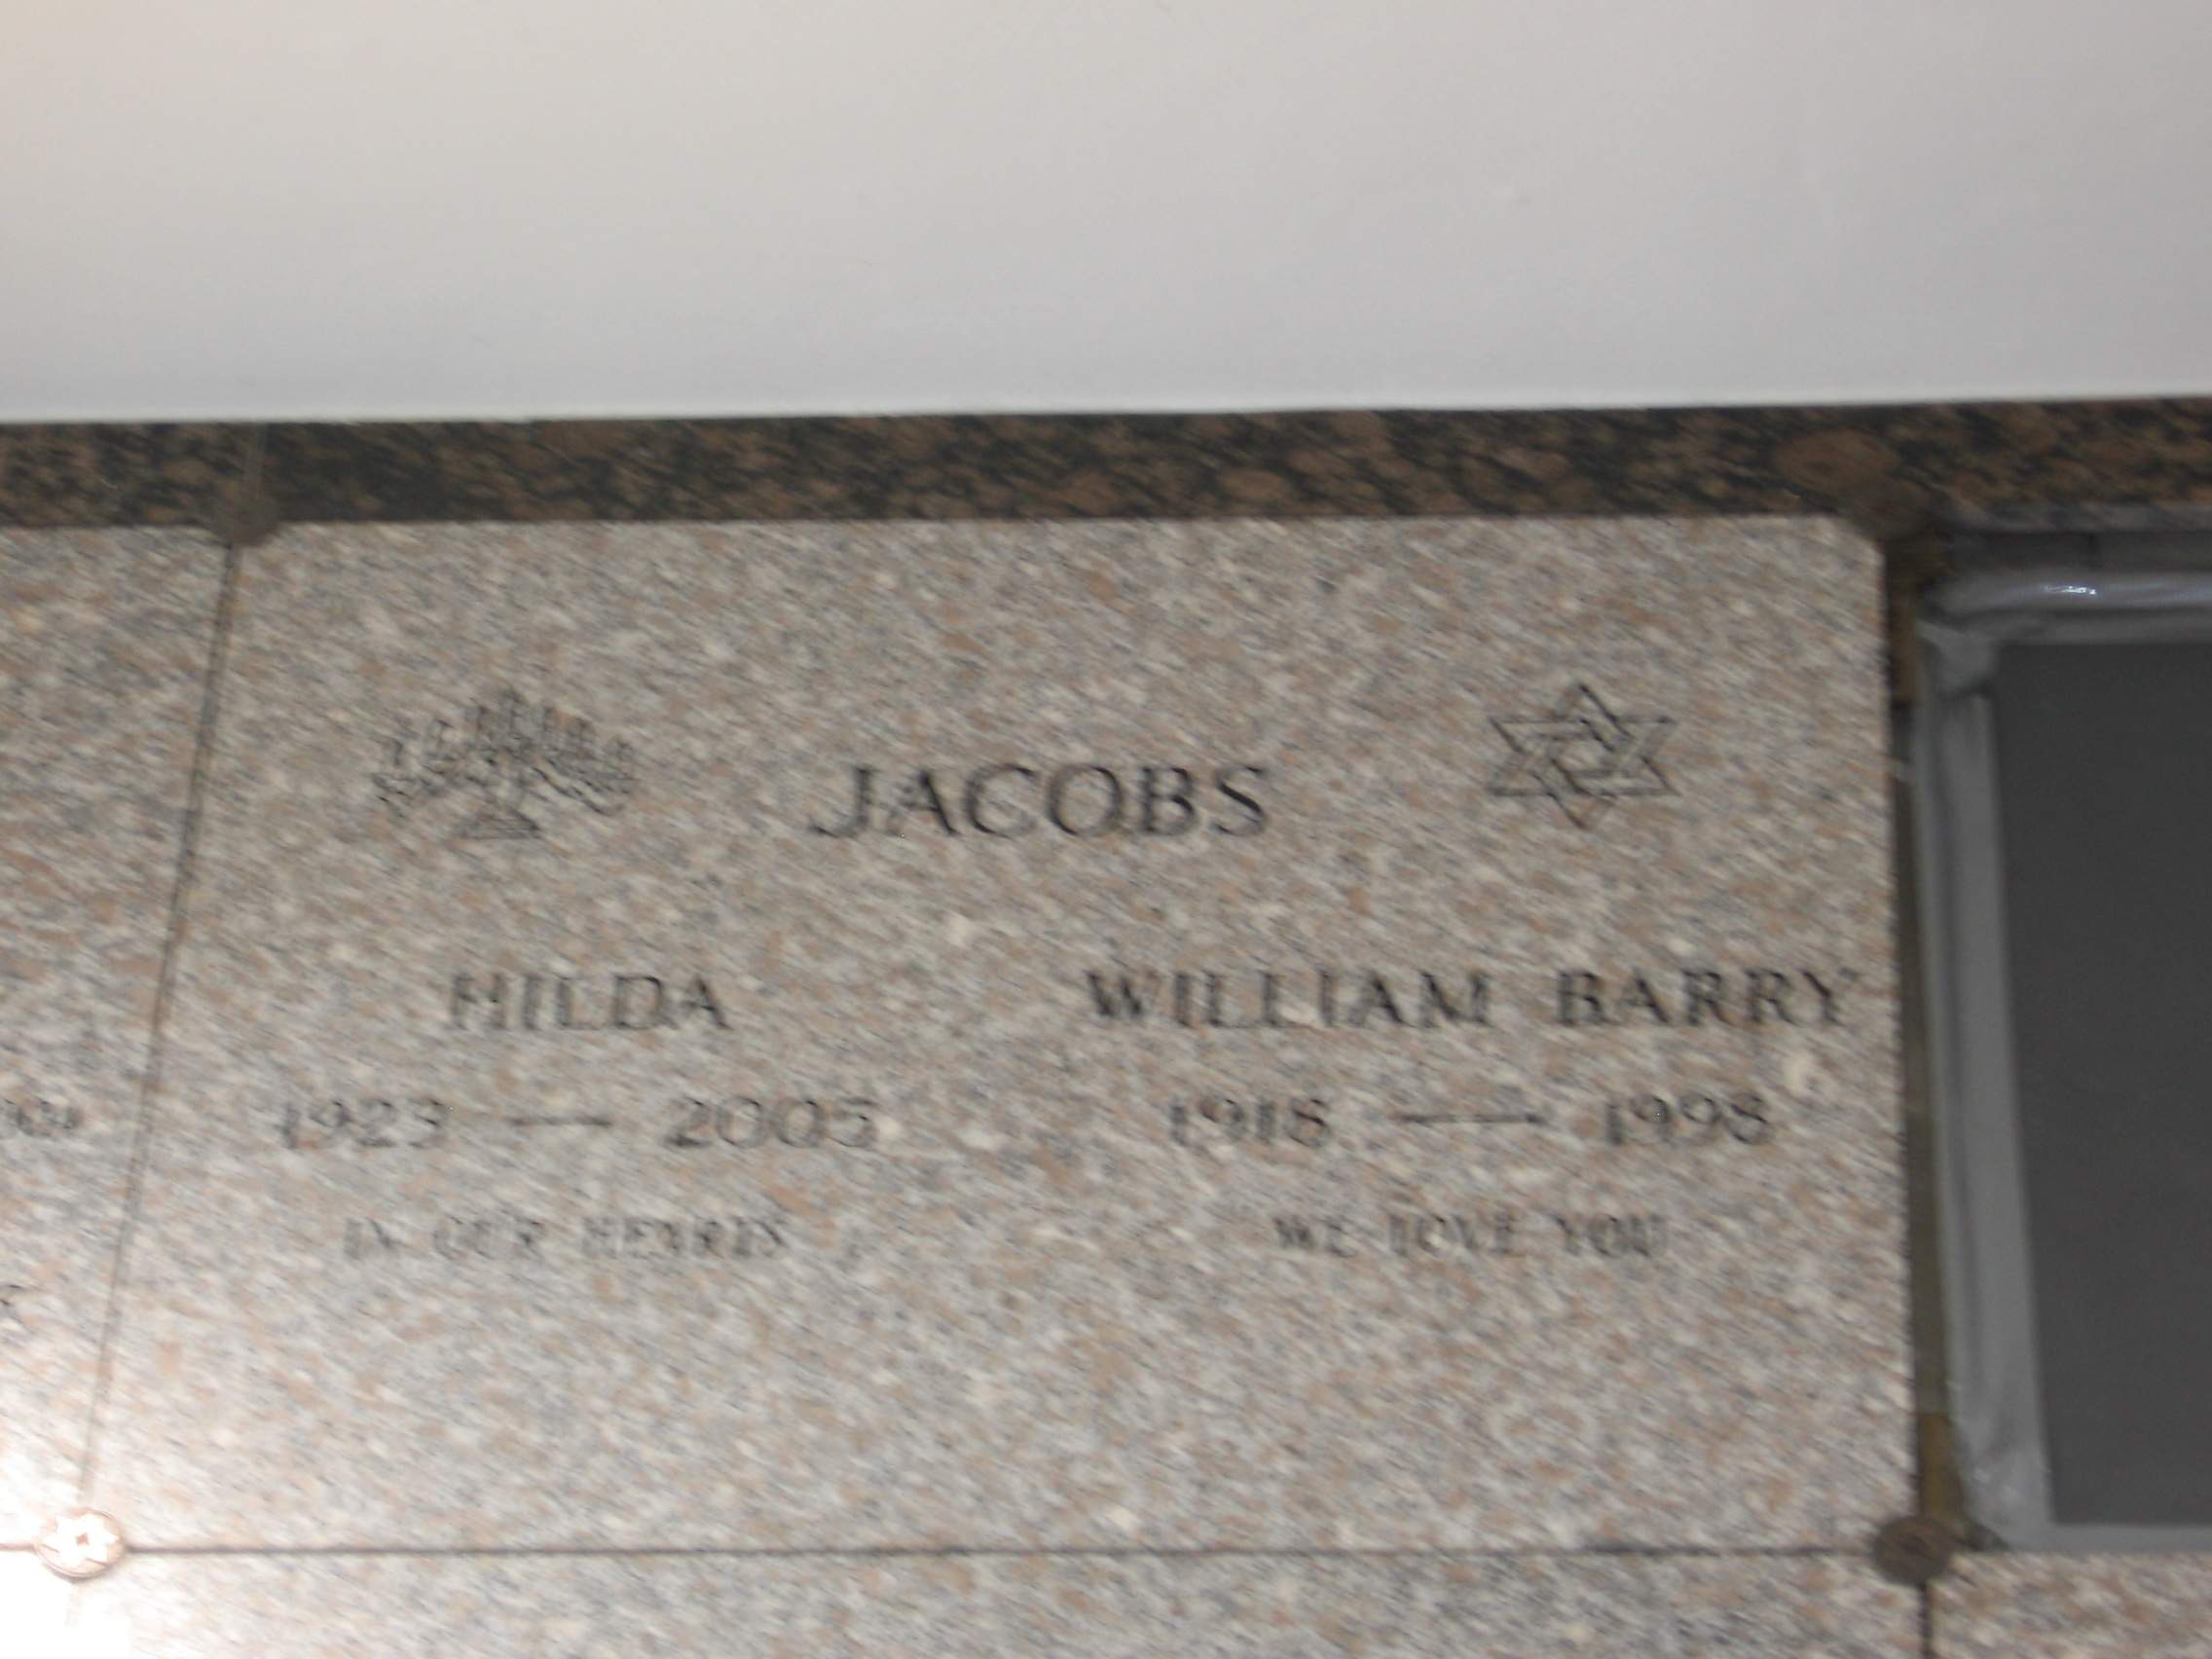 William Barry Jacobs